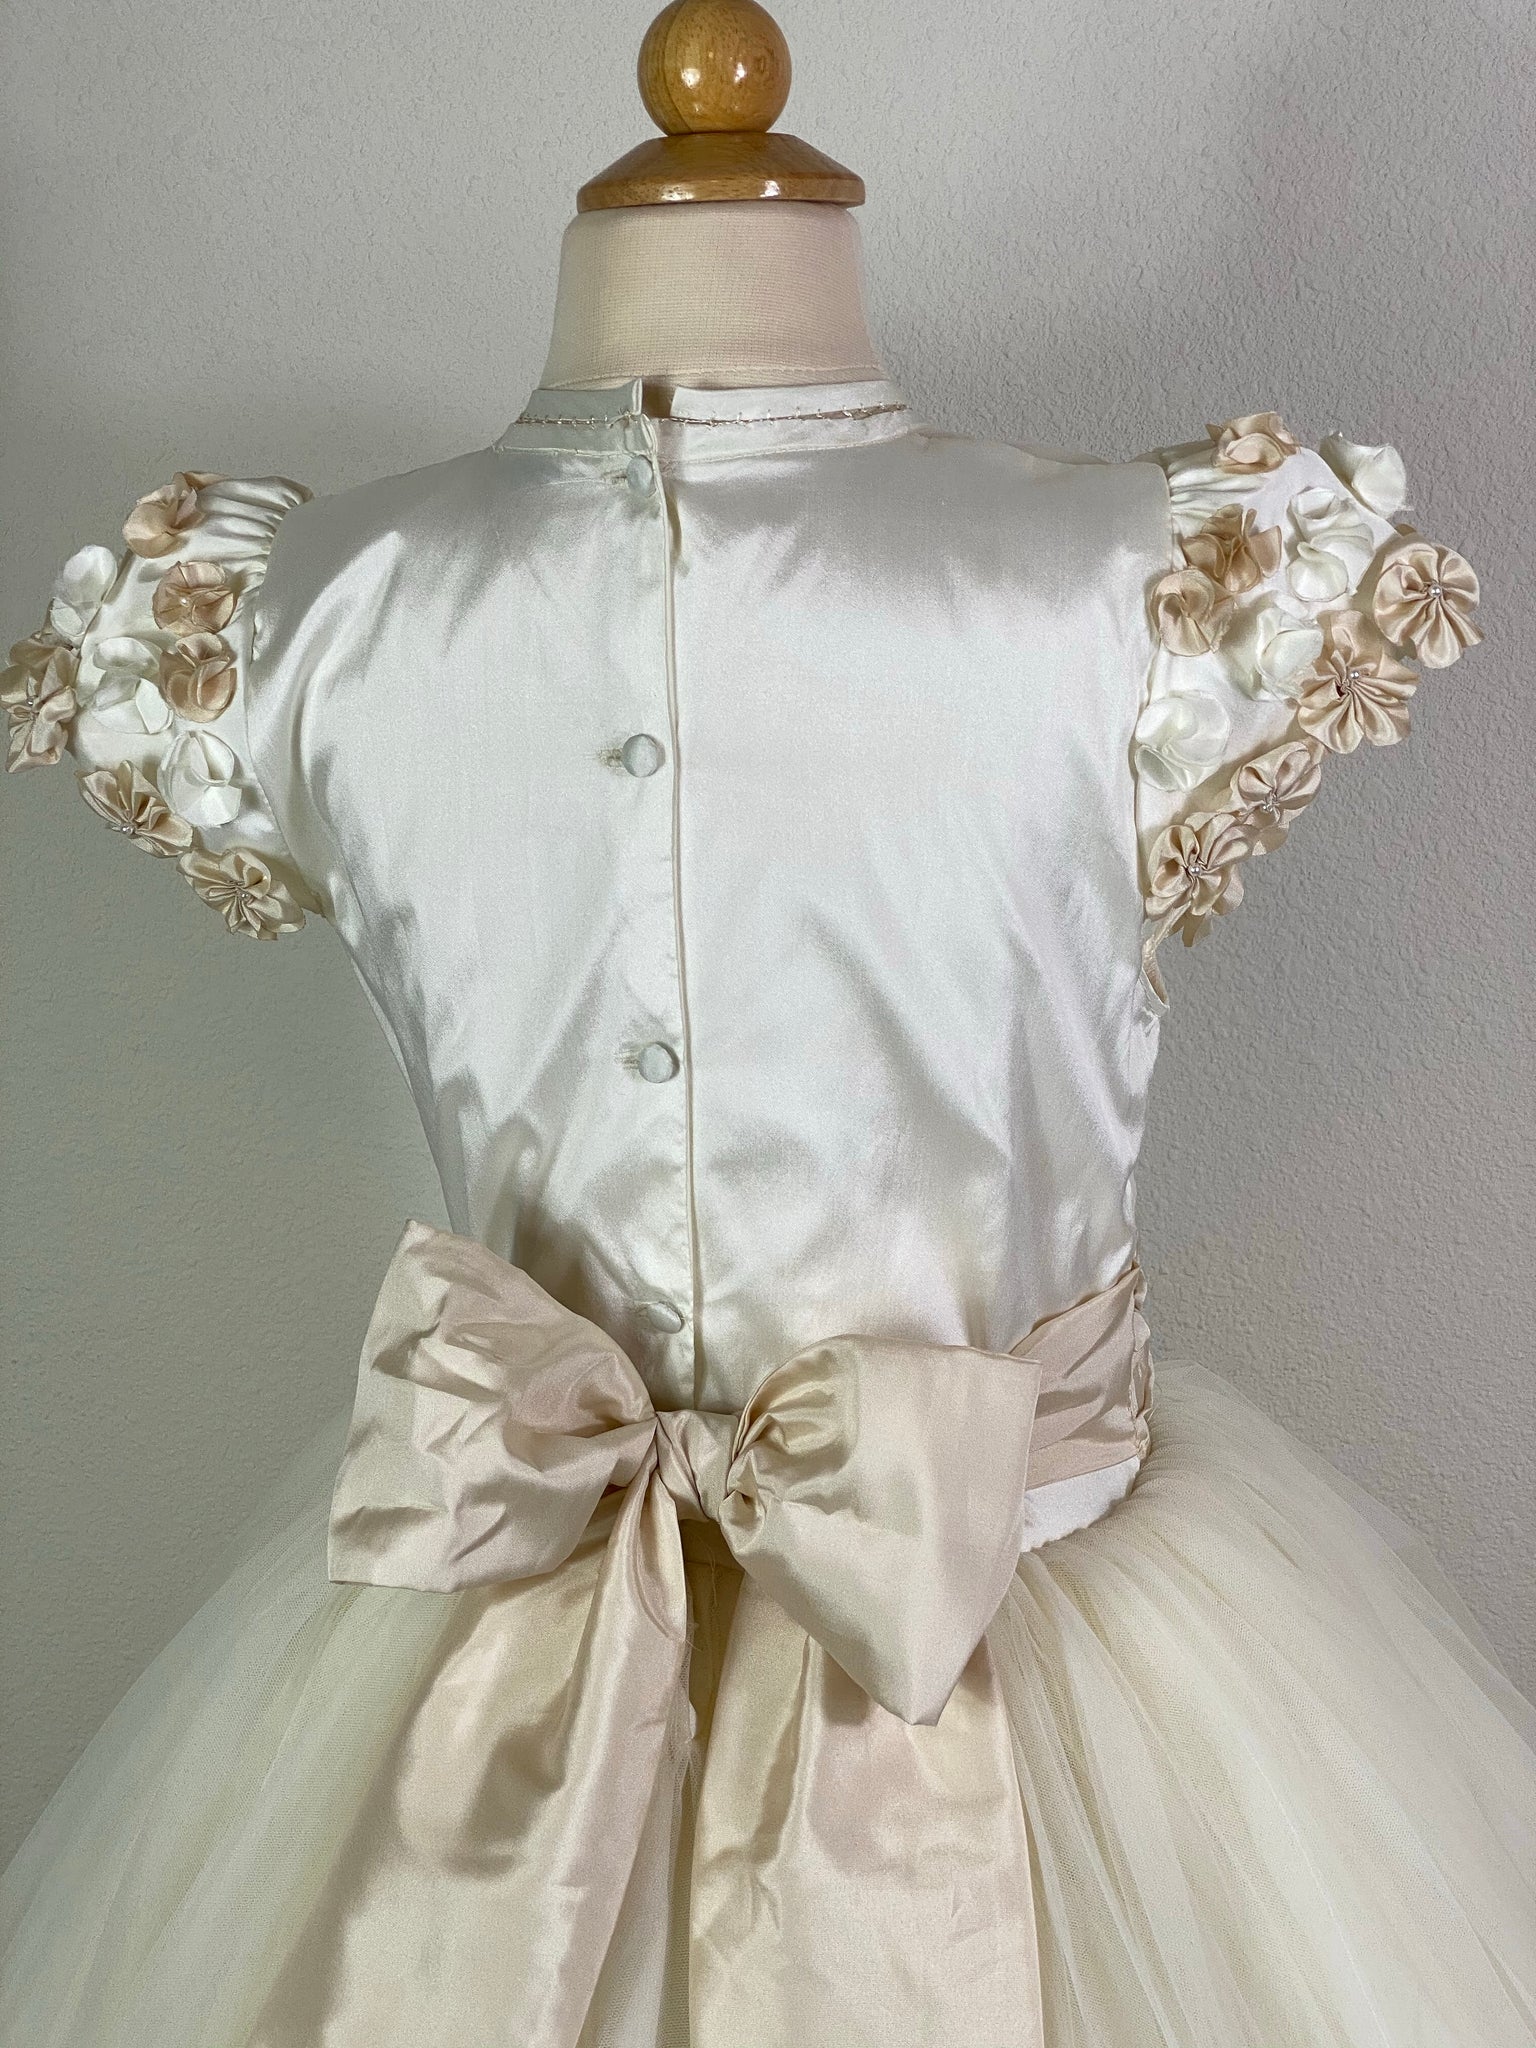 Ivory, size 8 Beige and Ivory floral covered cap sleeve Satin and mesh ivory illusion bodice with flower detailing Beige ruched cummerbund Layered tulle skirt lined with beige satin trim Floral cross detailing below bodice Satin covered button closure Beige ribboning for large bow